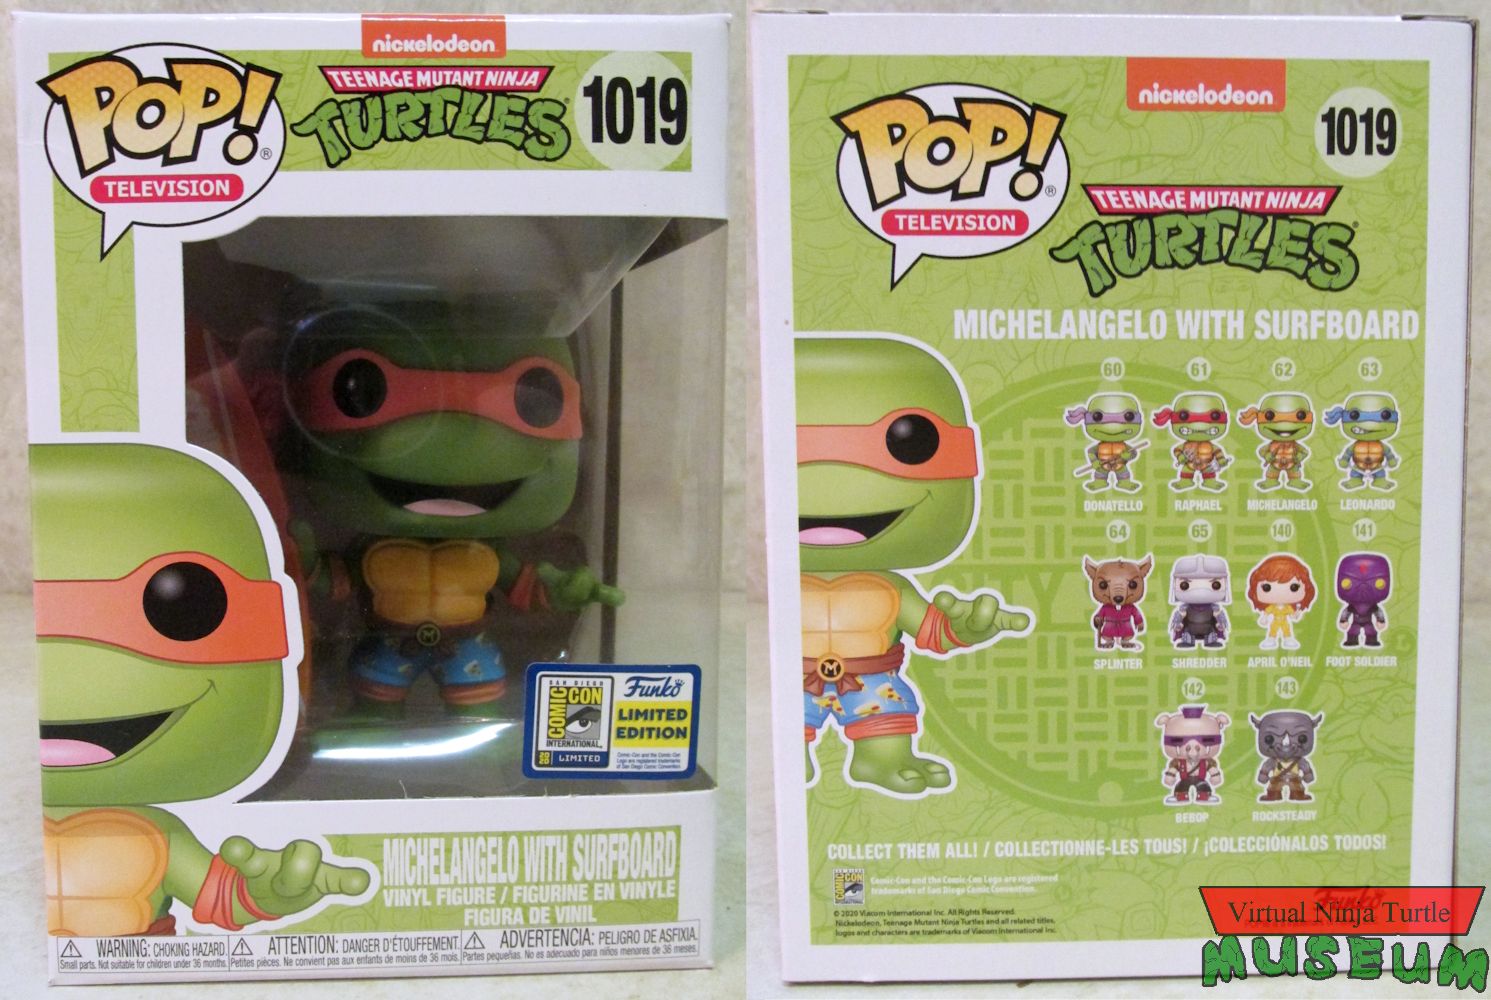 SDCC sticker box front and back